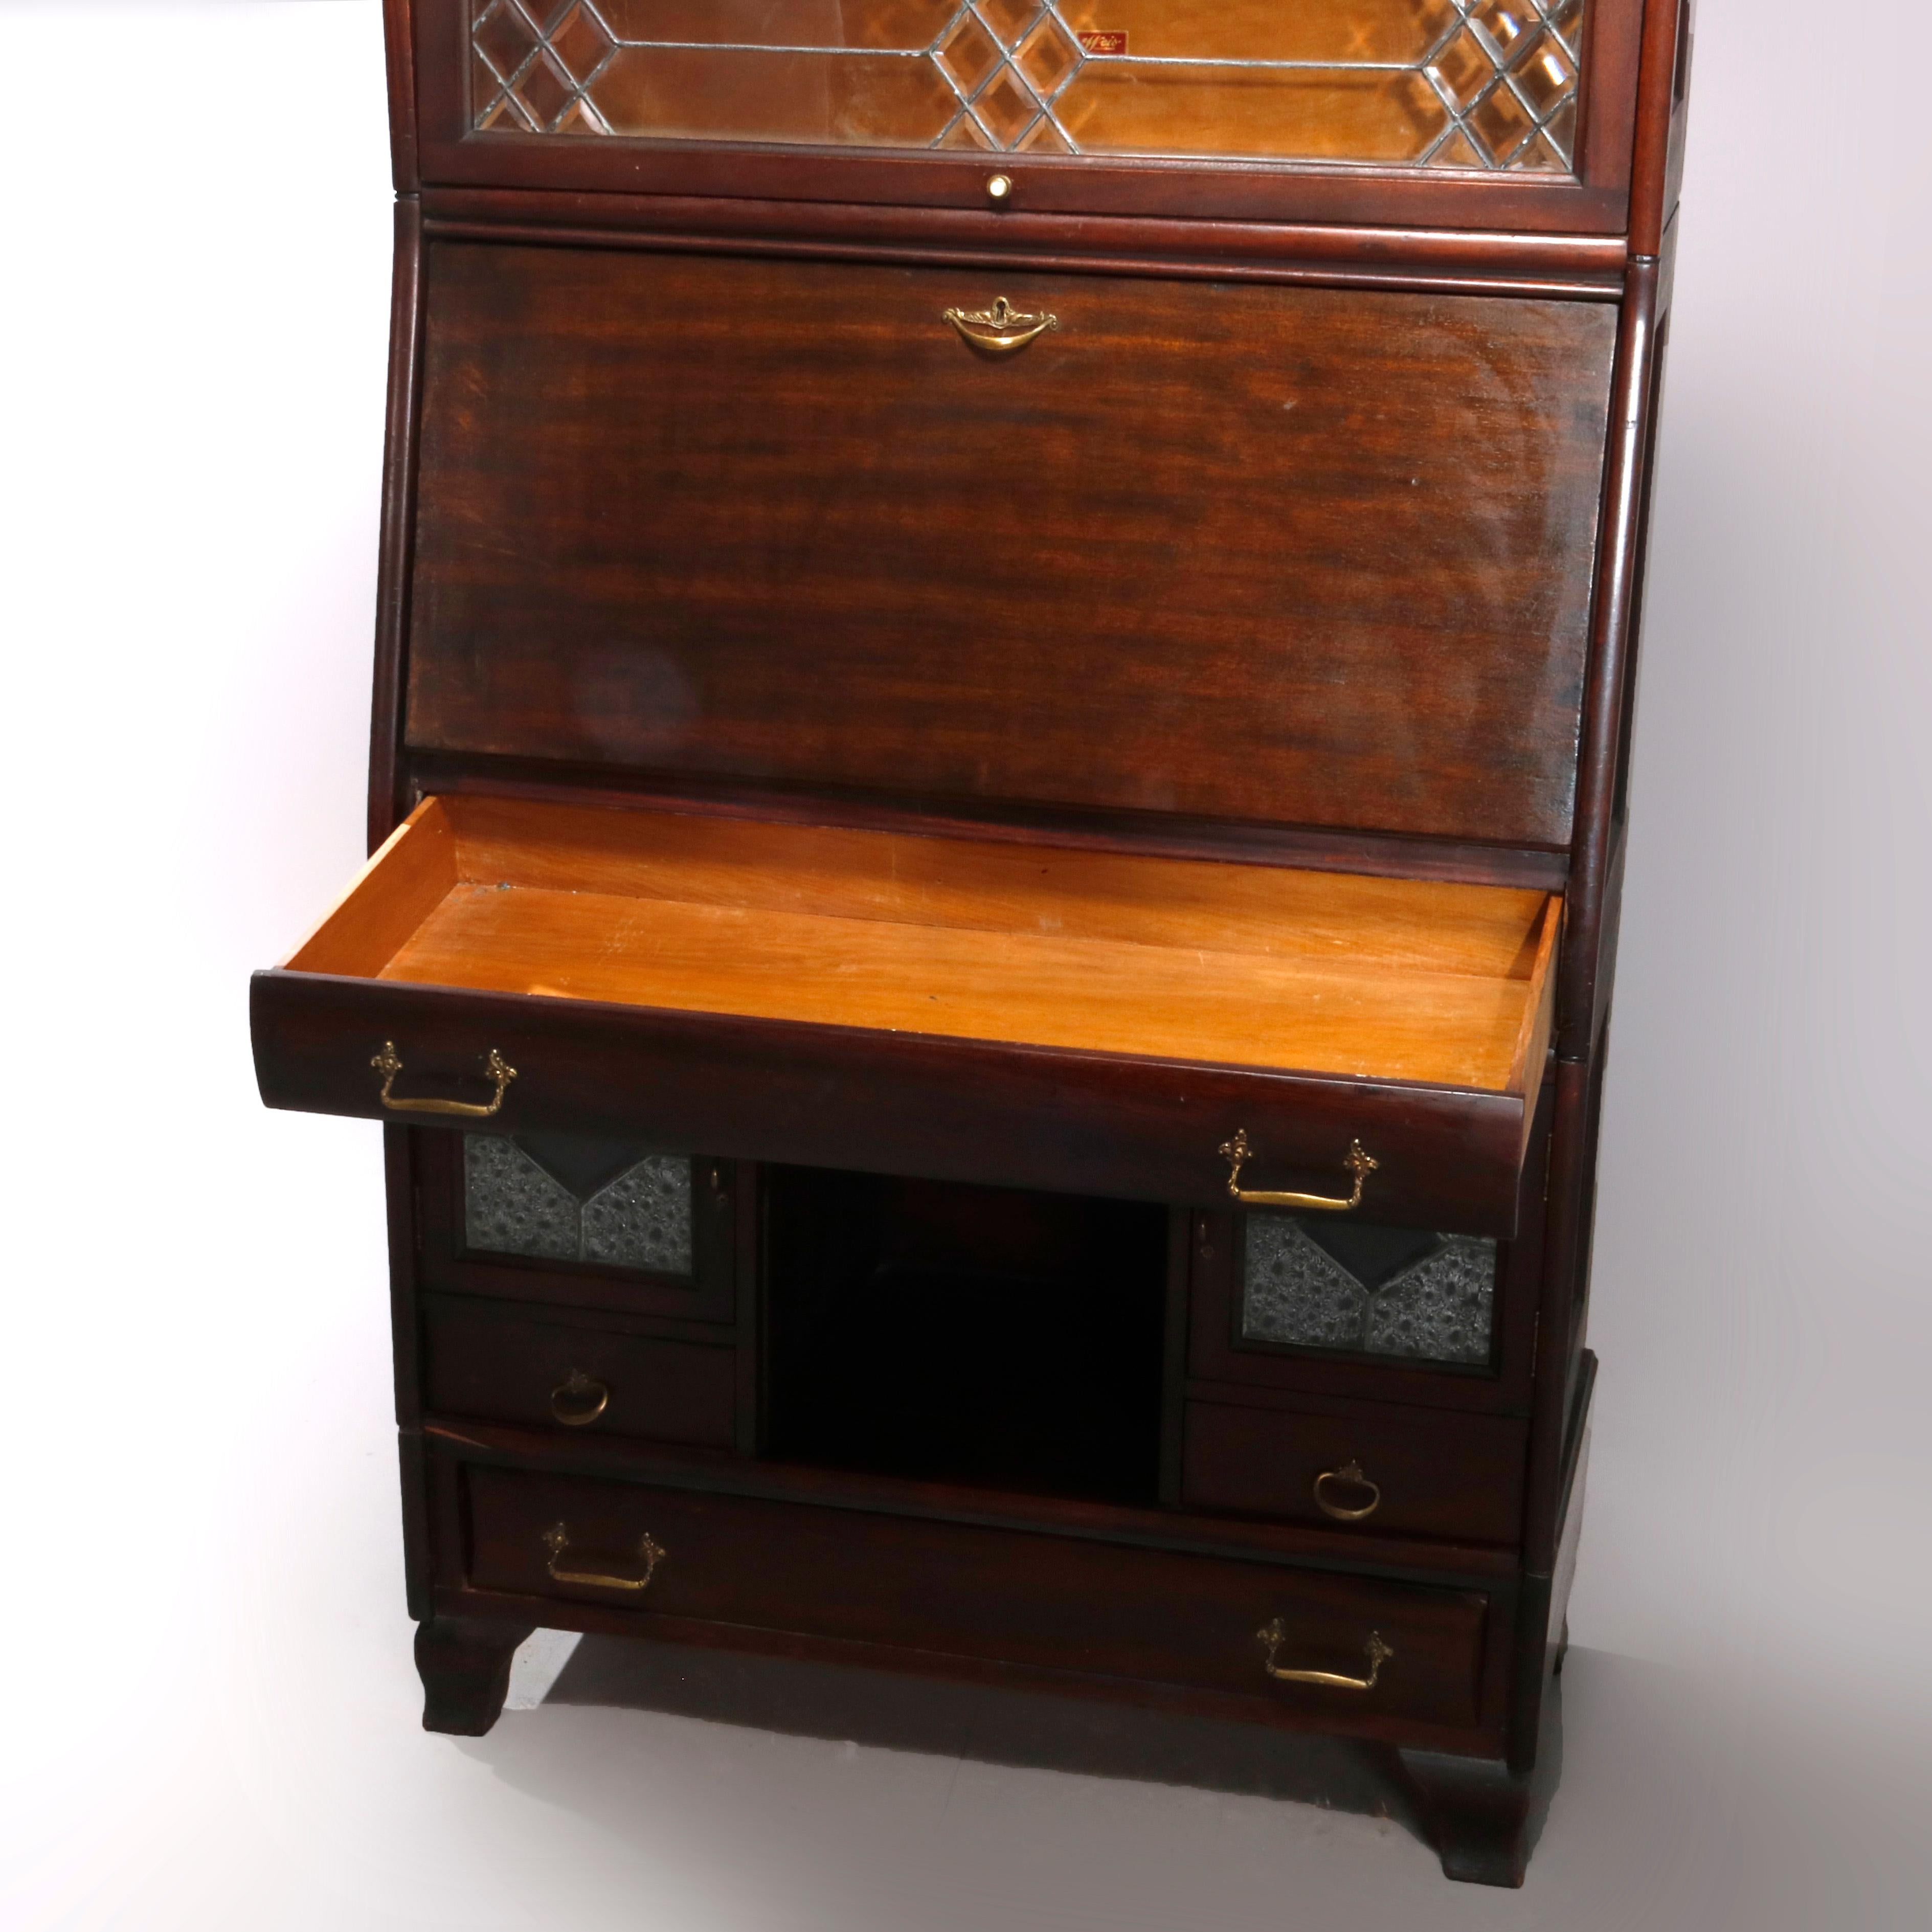 American Arts & Crafts Stacking Barrister Bookcase and Desk with Leaded Glass, circa 1910